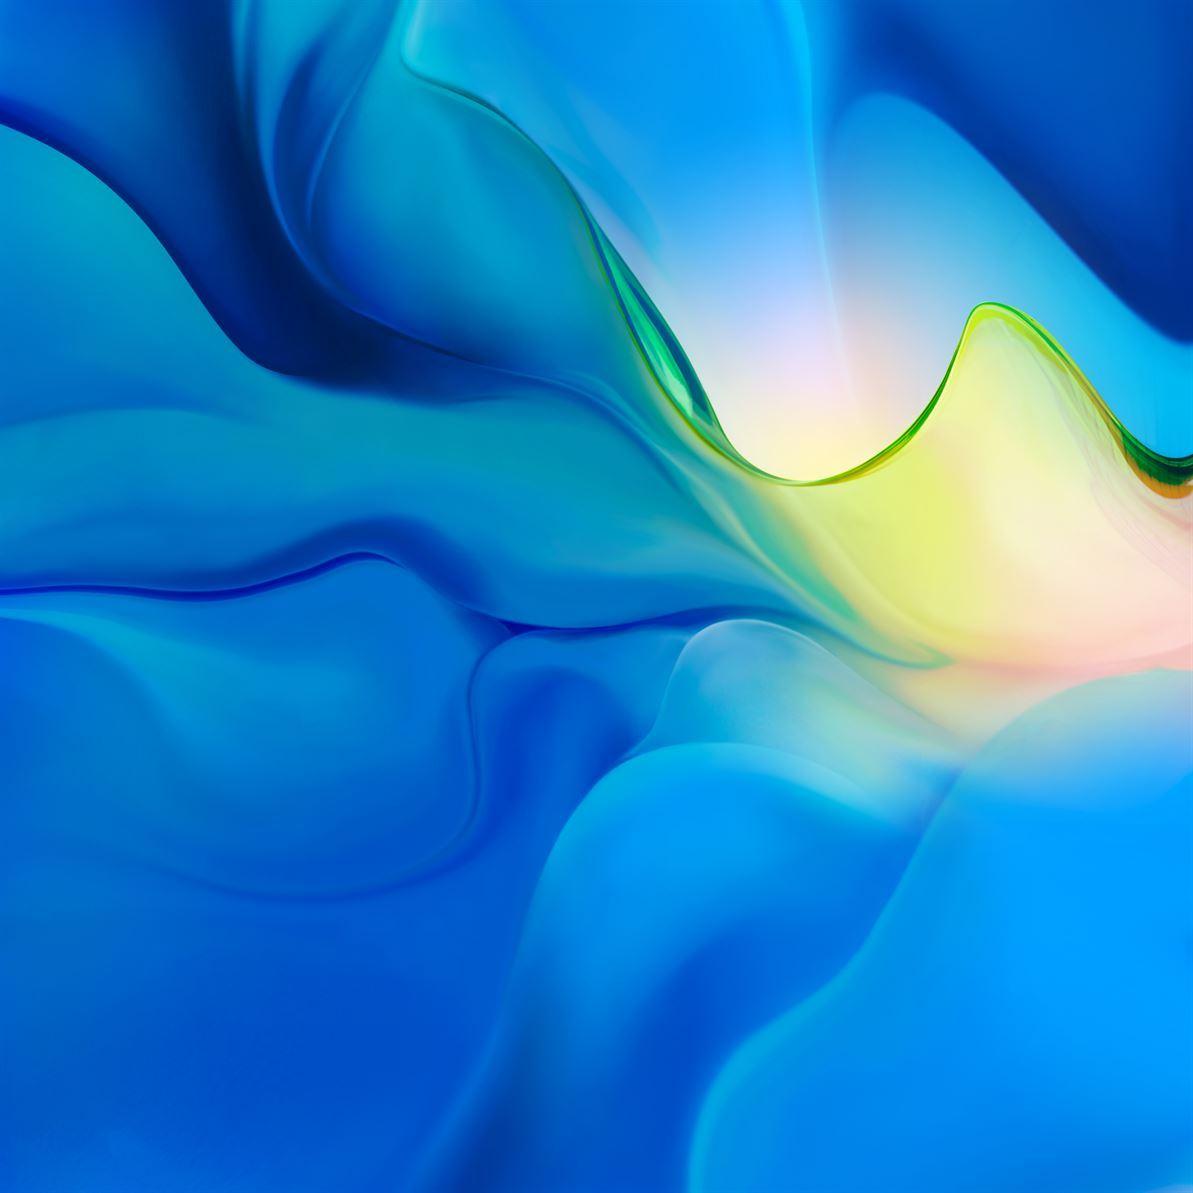 Download the Huawei P30's wallpaper and EMUI 9 themes